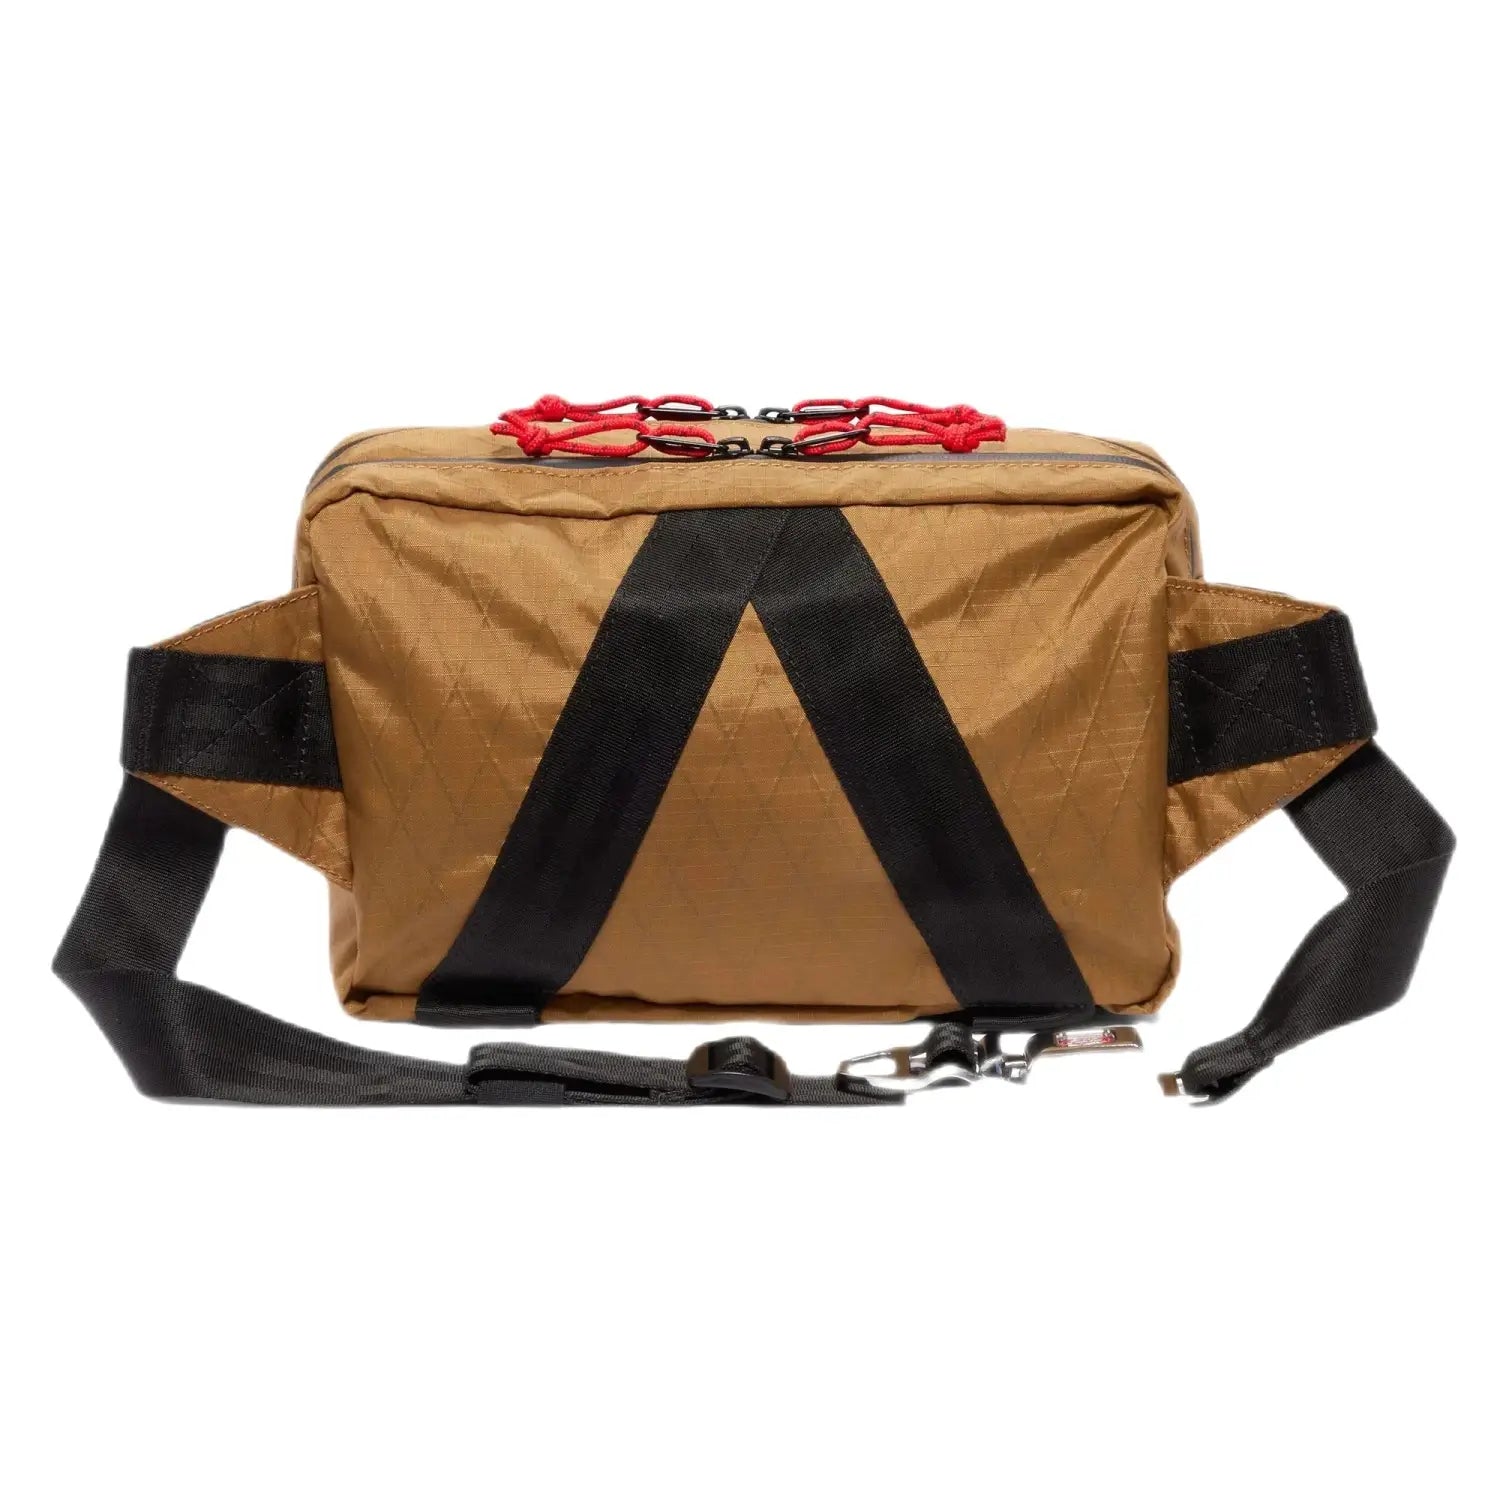 Chrome Industries Tensile Sling Bag shown in the Amber-X color option. Back view